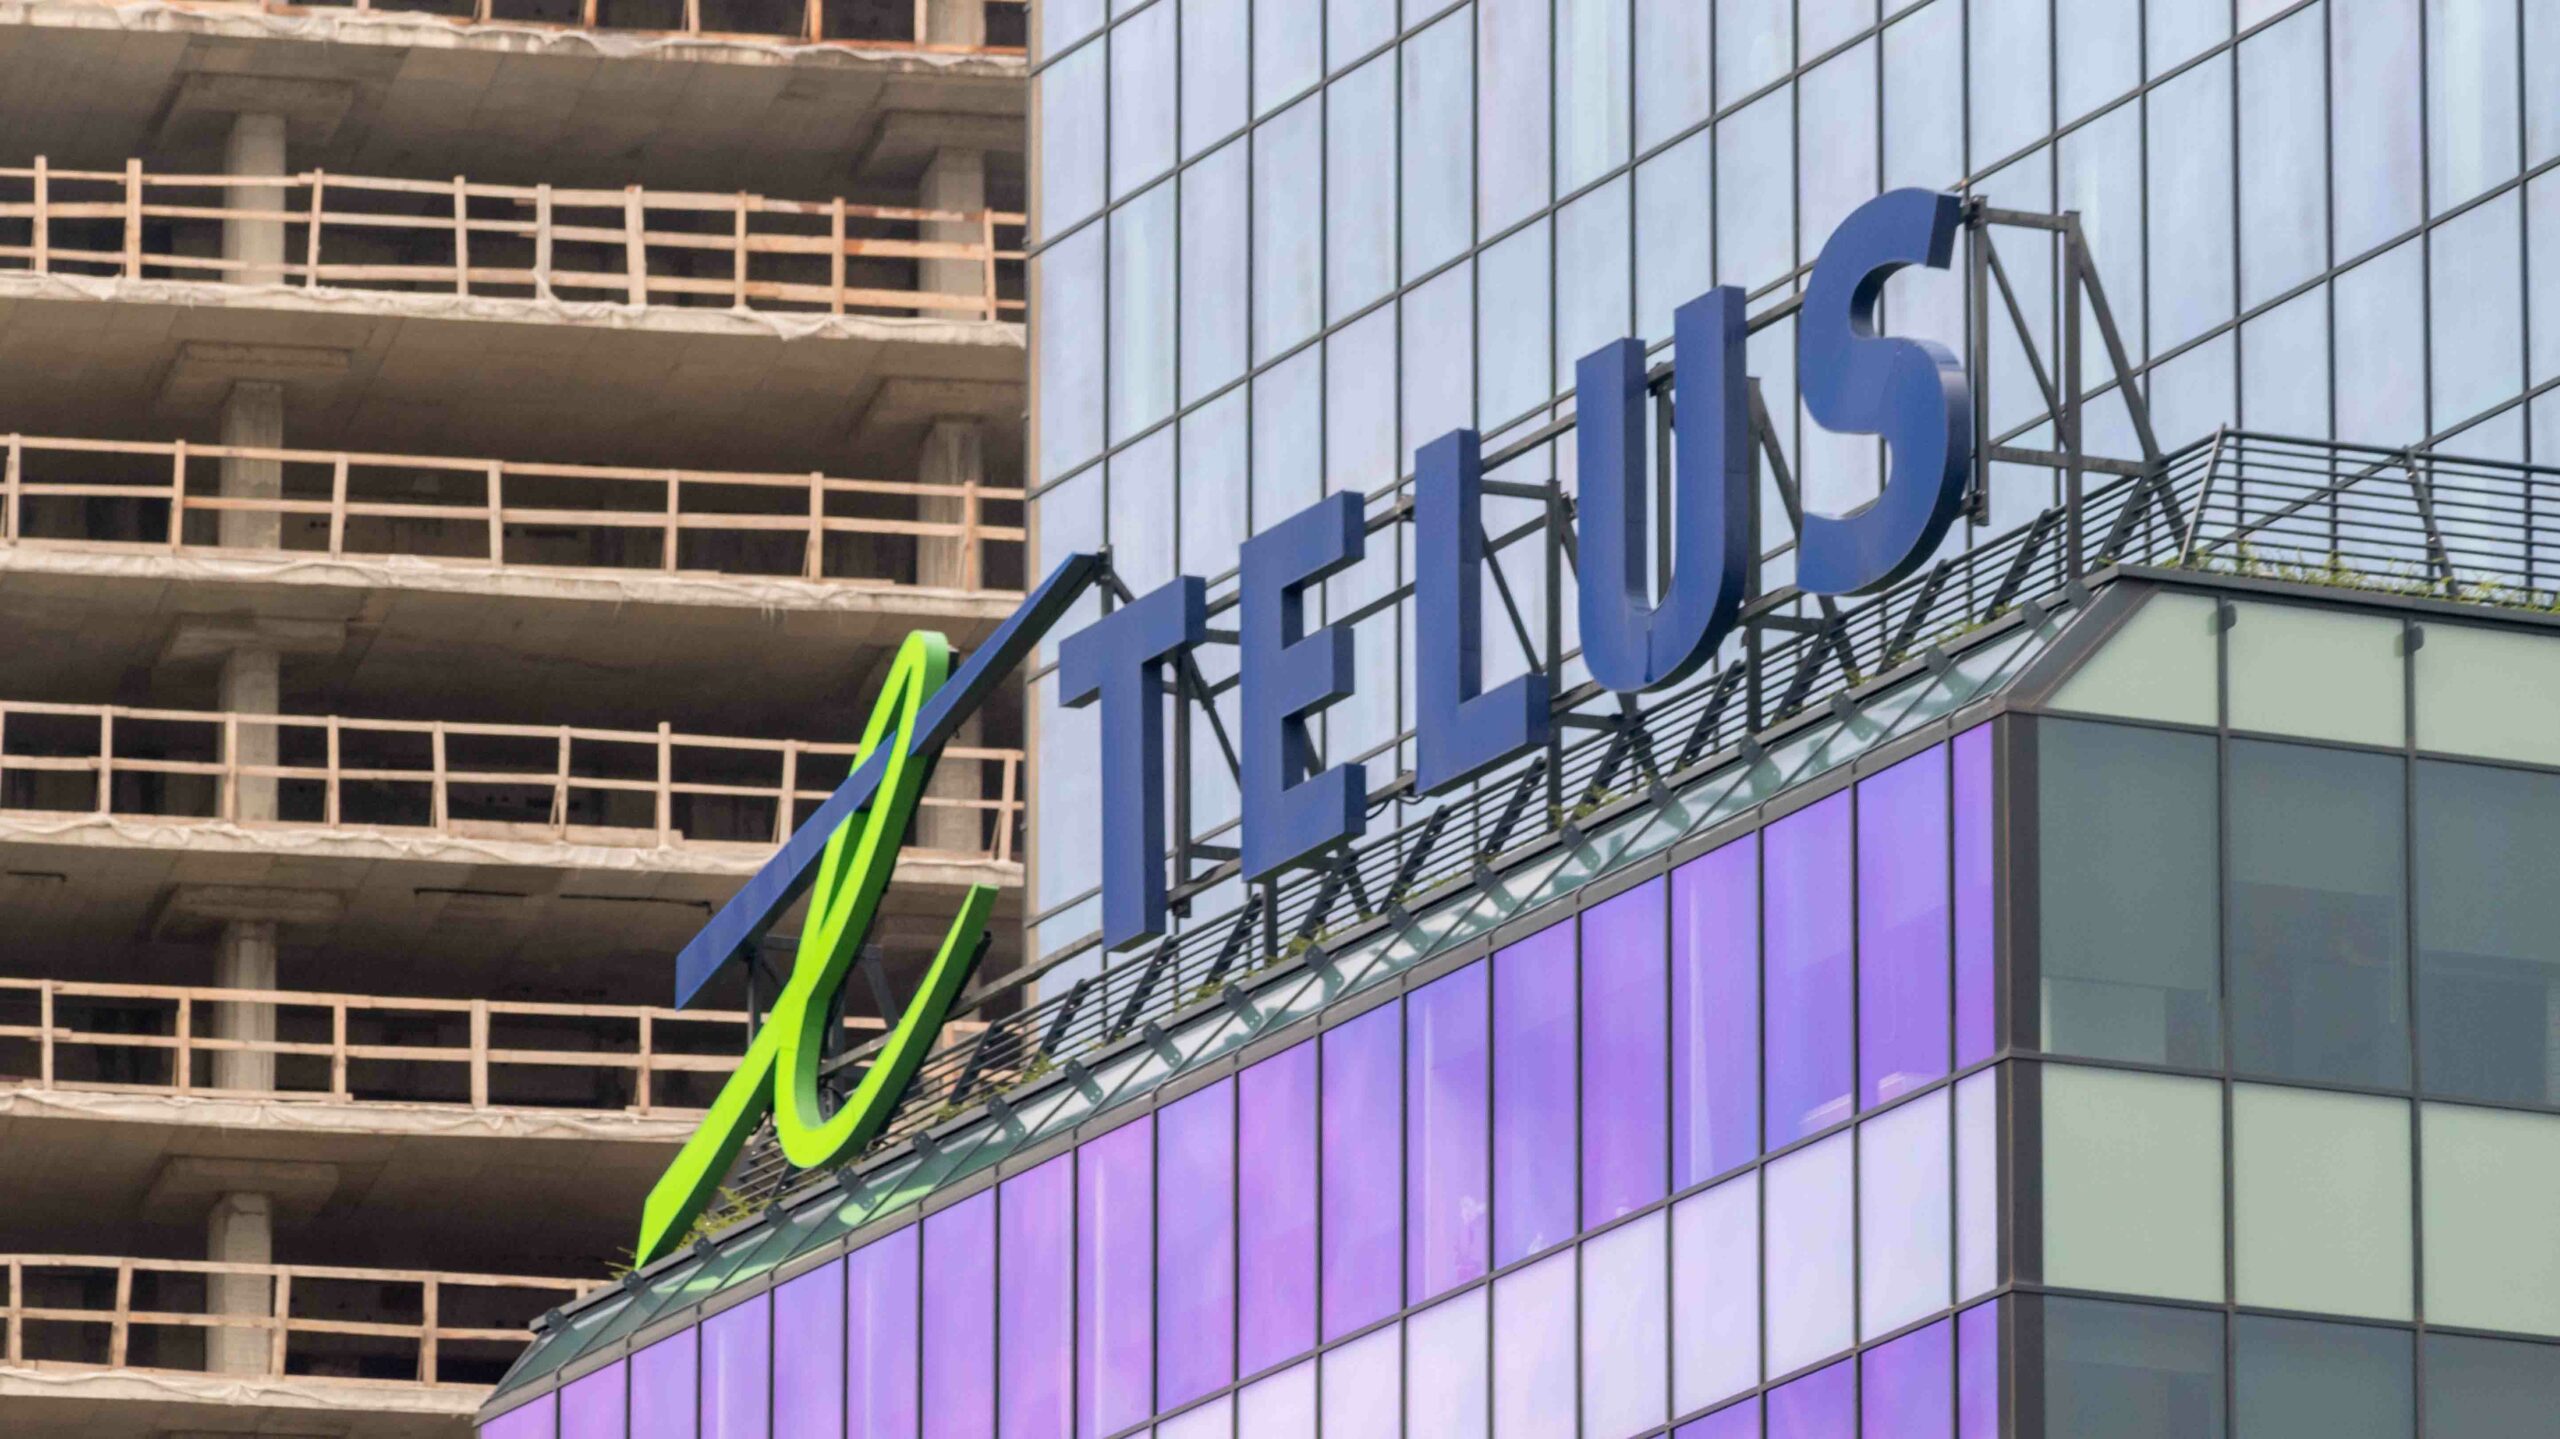 Telus funding pilot program using VR to decrease anxiety, use of prescribed medication